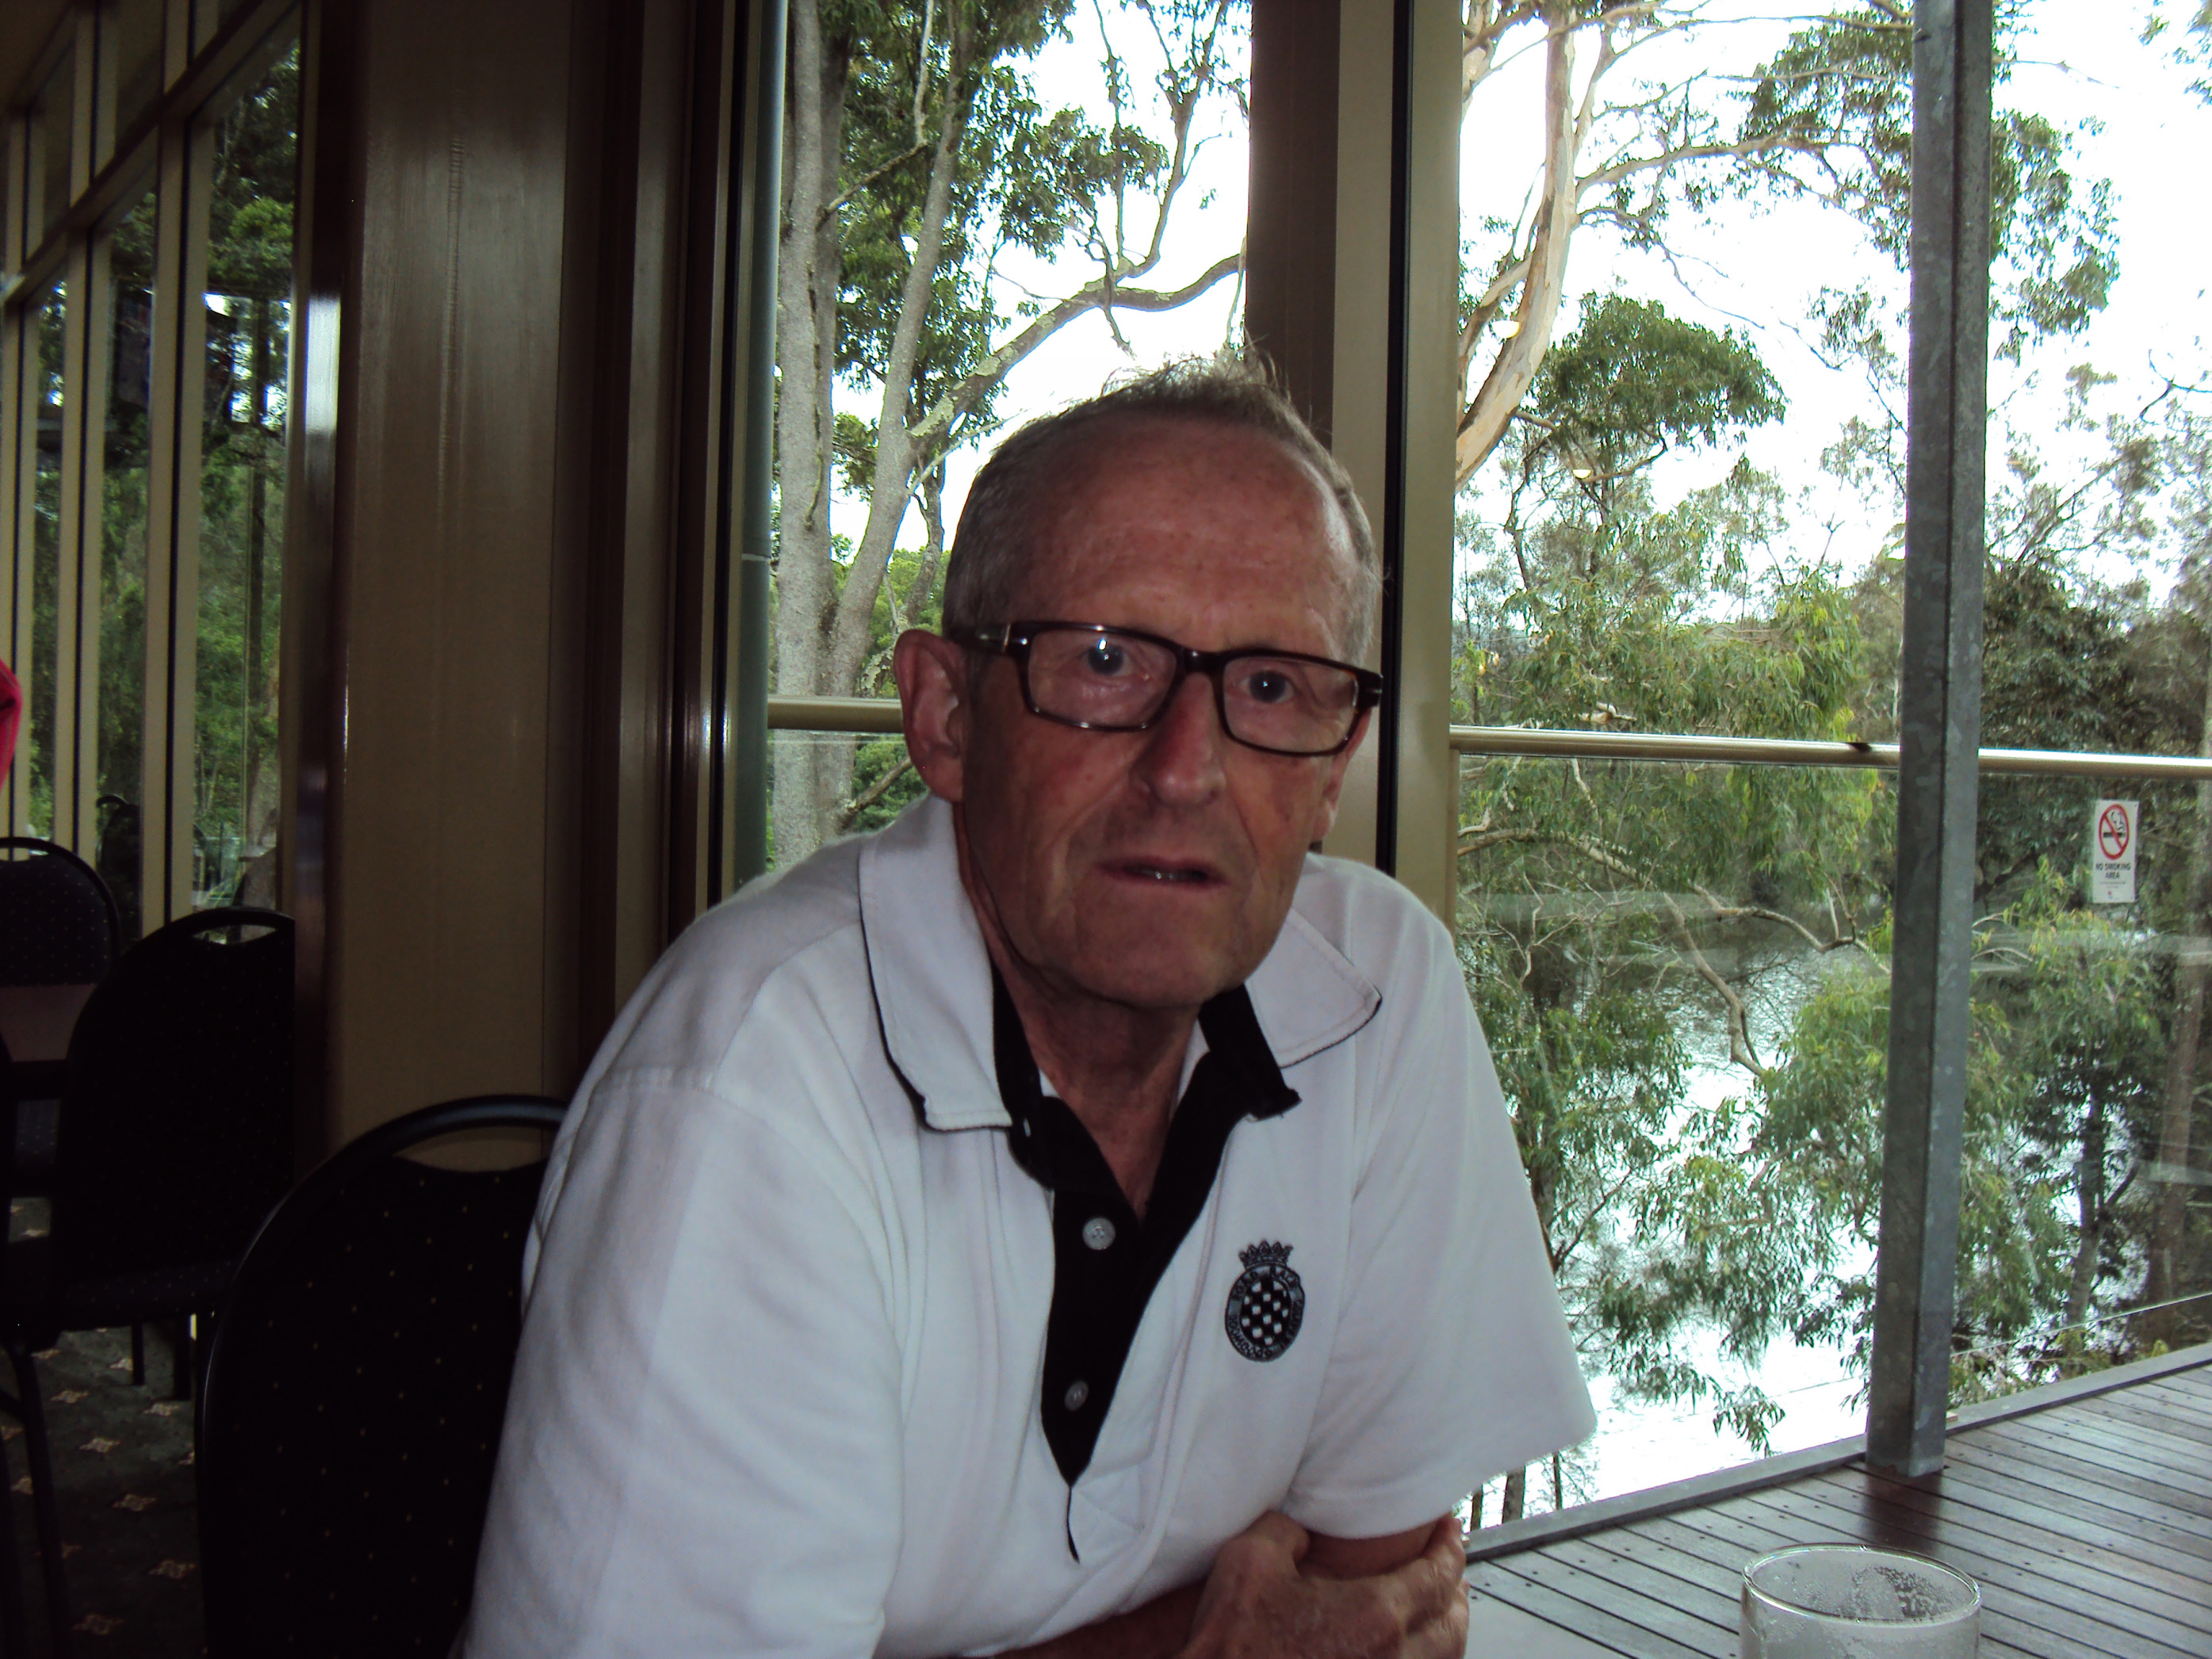 <span style='font-size:11.0pt'><span style='line-height:105%'><span style='font-family:'Calibri',sans-serif'>After more than 50 years associated with the Wellington Racing Club, Robin Tapp</span></span></span>